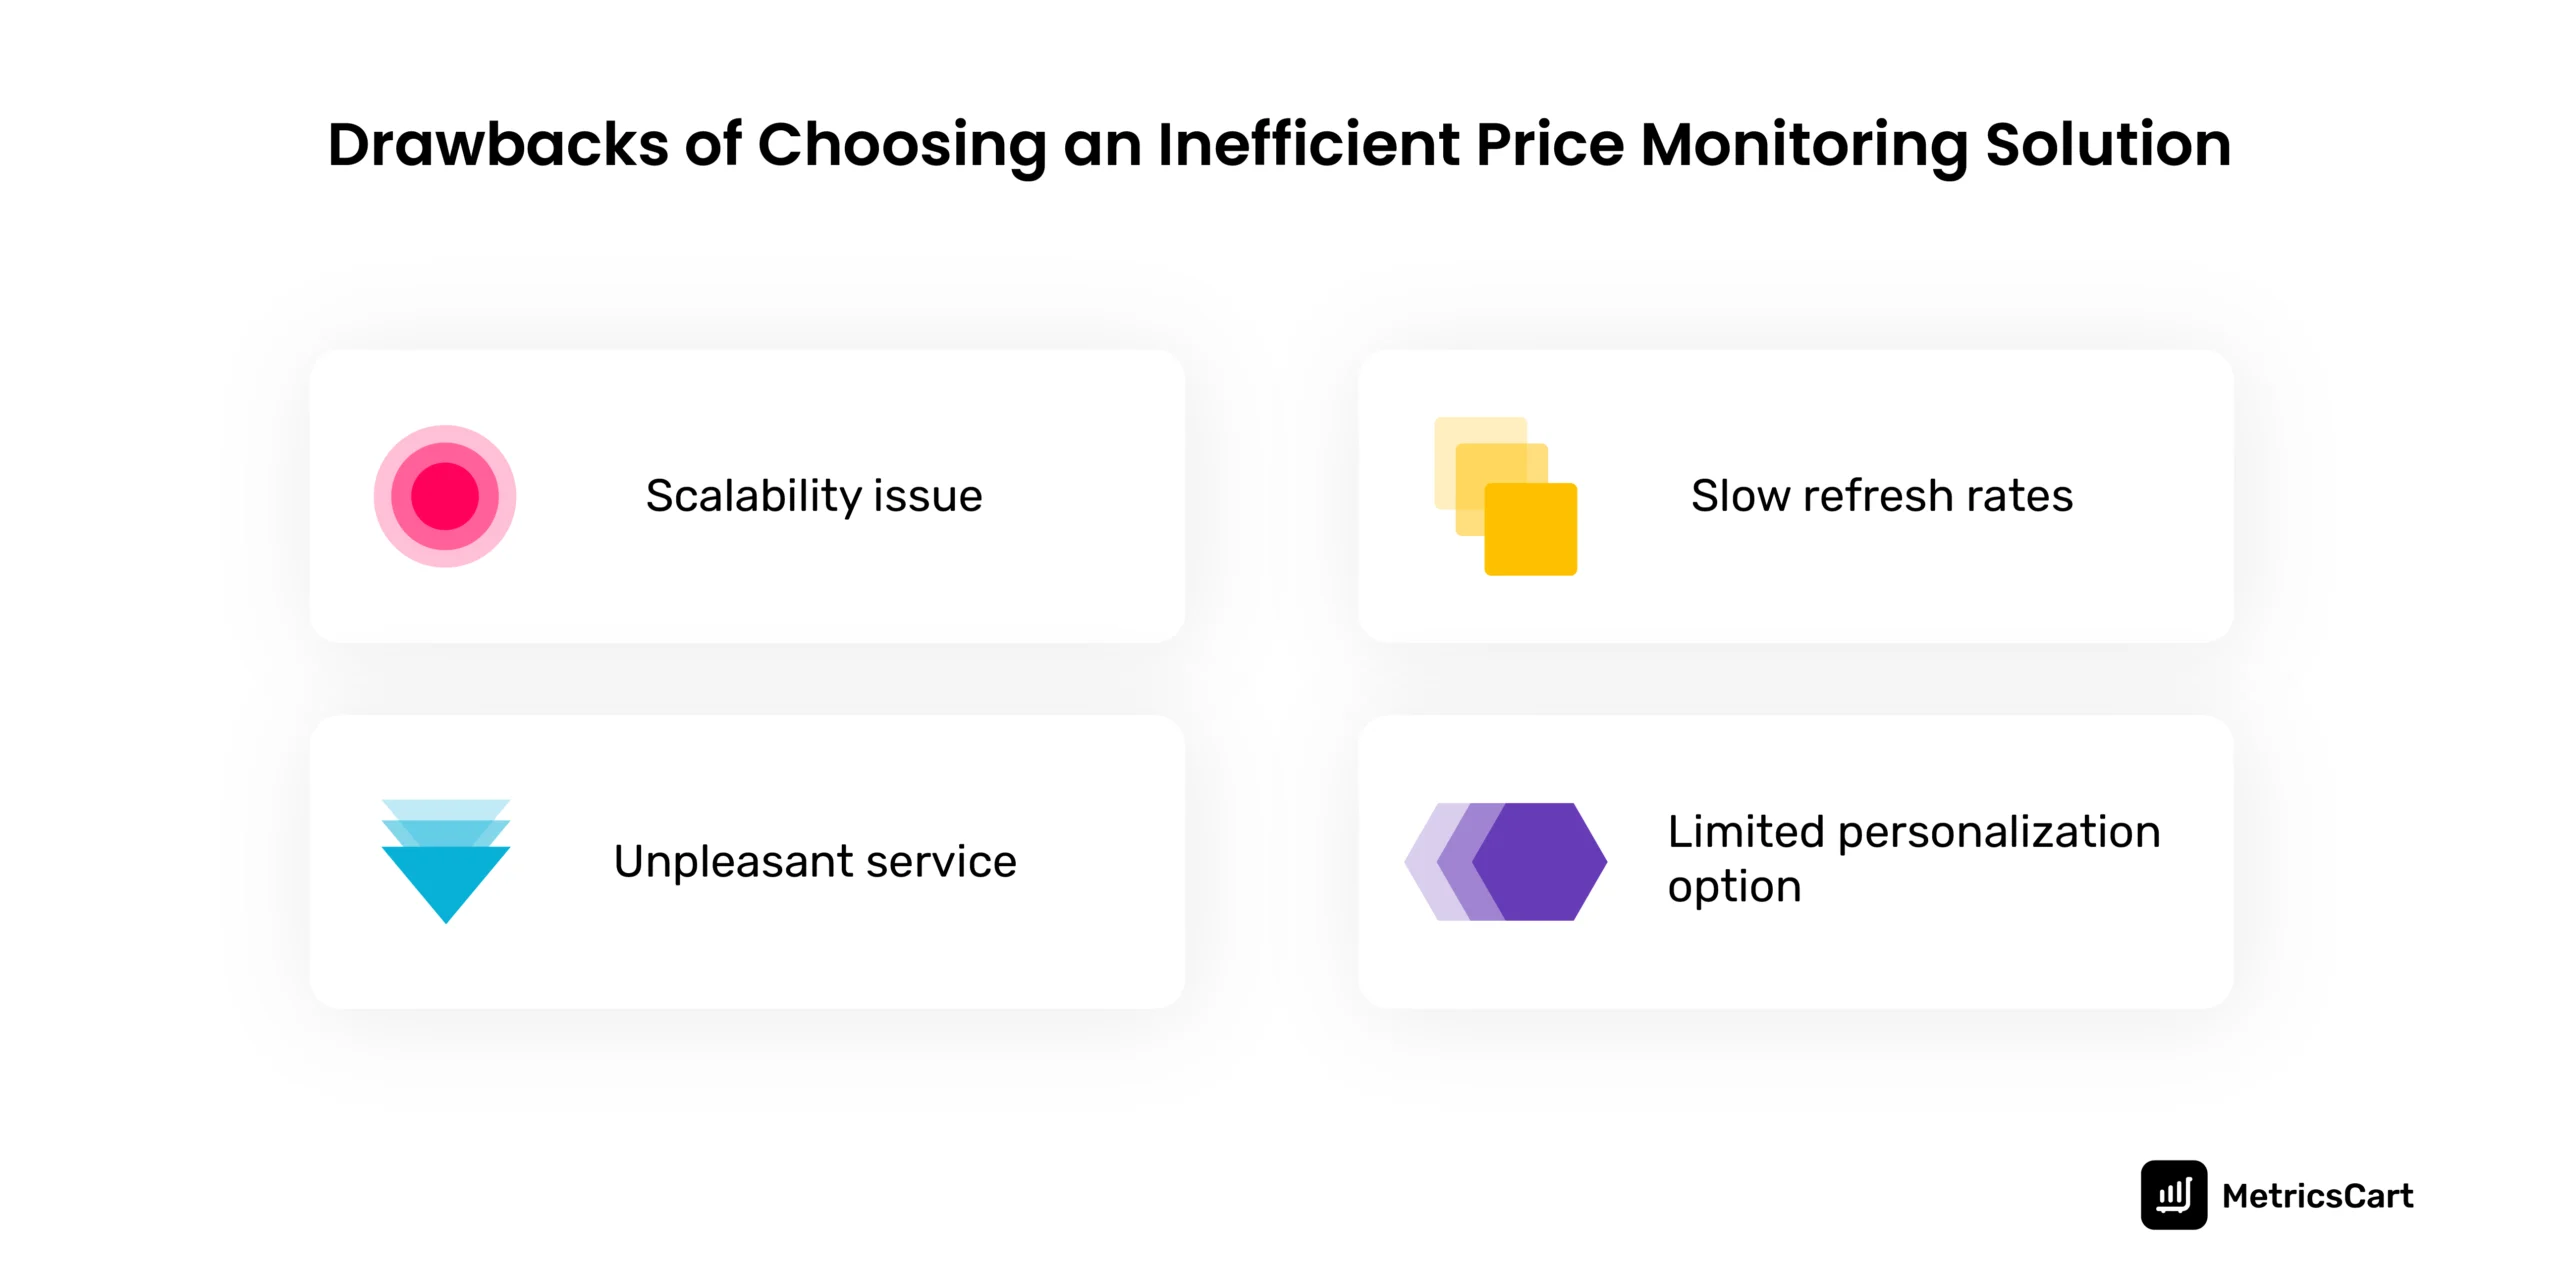 The image shows the Drawbacks of Choosing an Inefficient Price Monitoring App Service